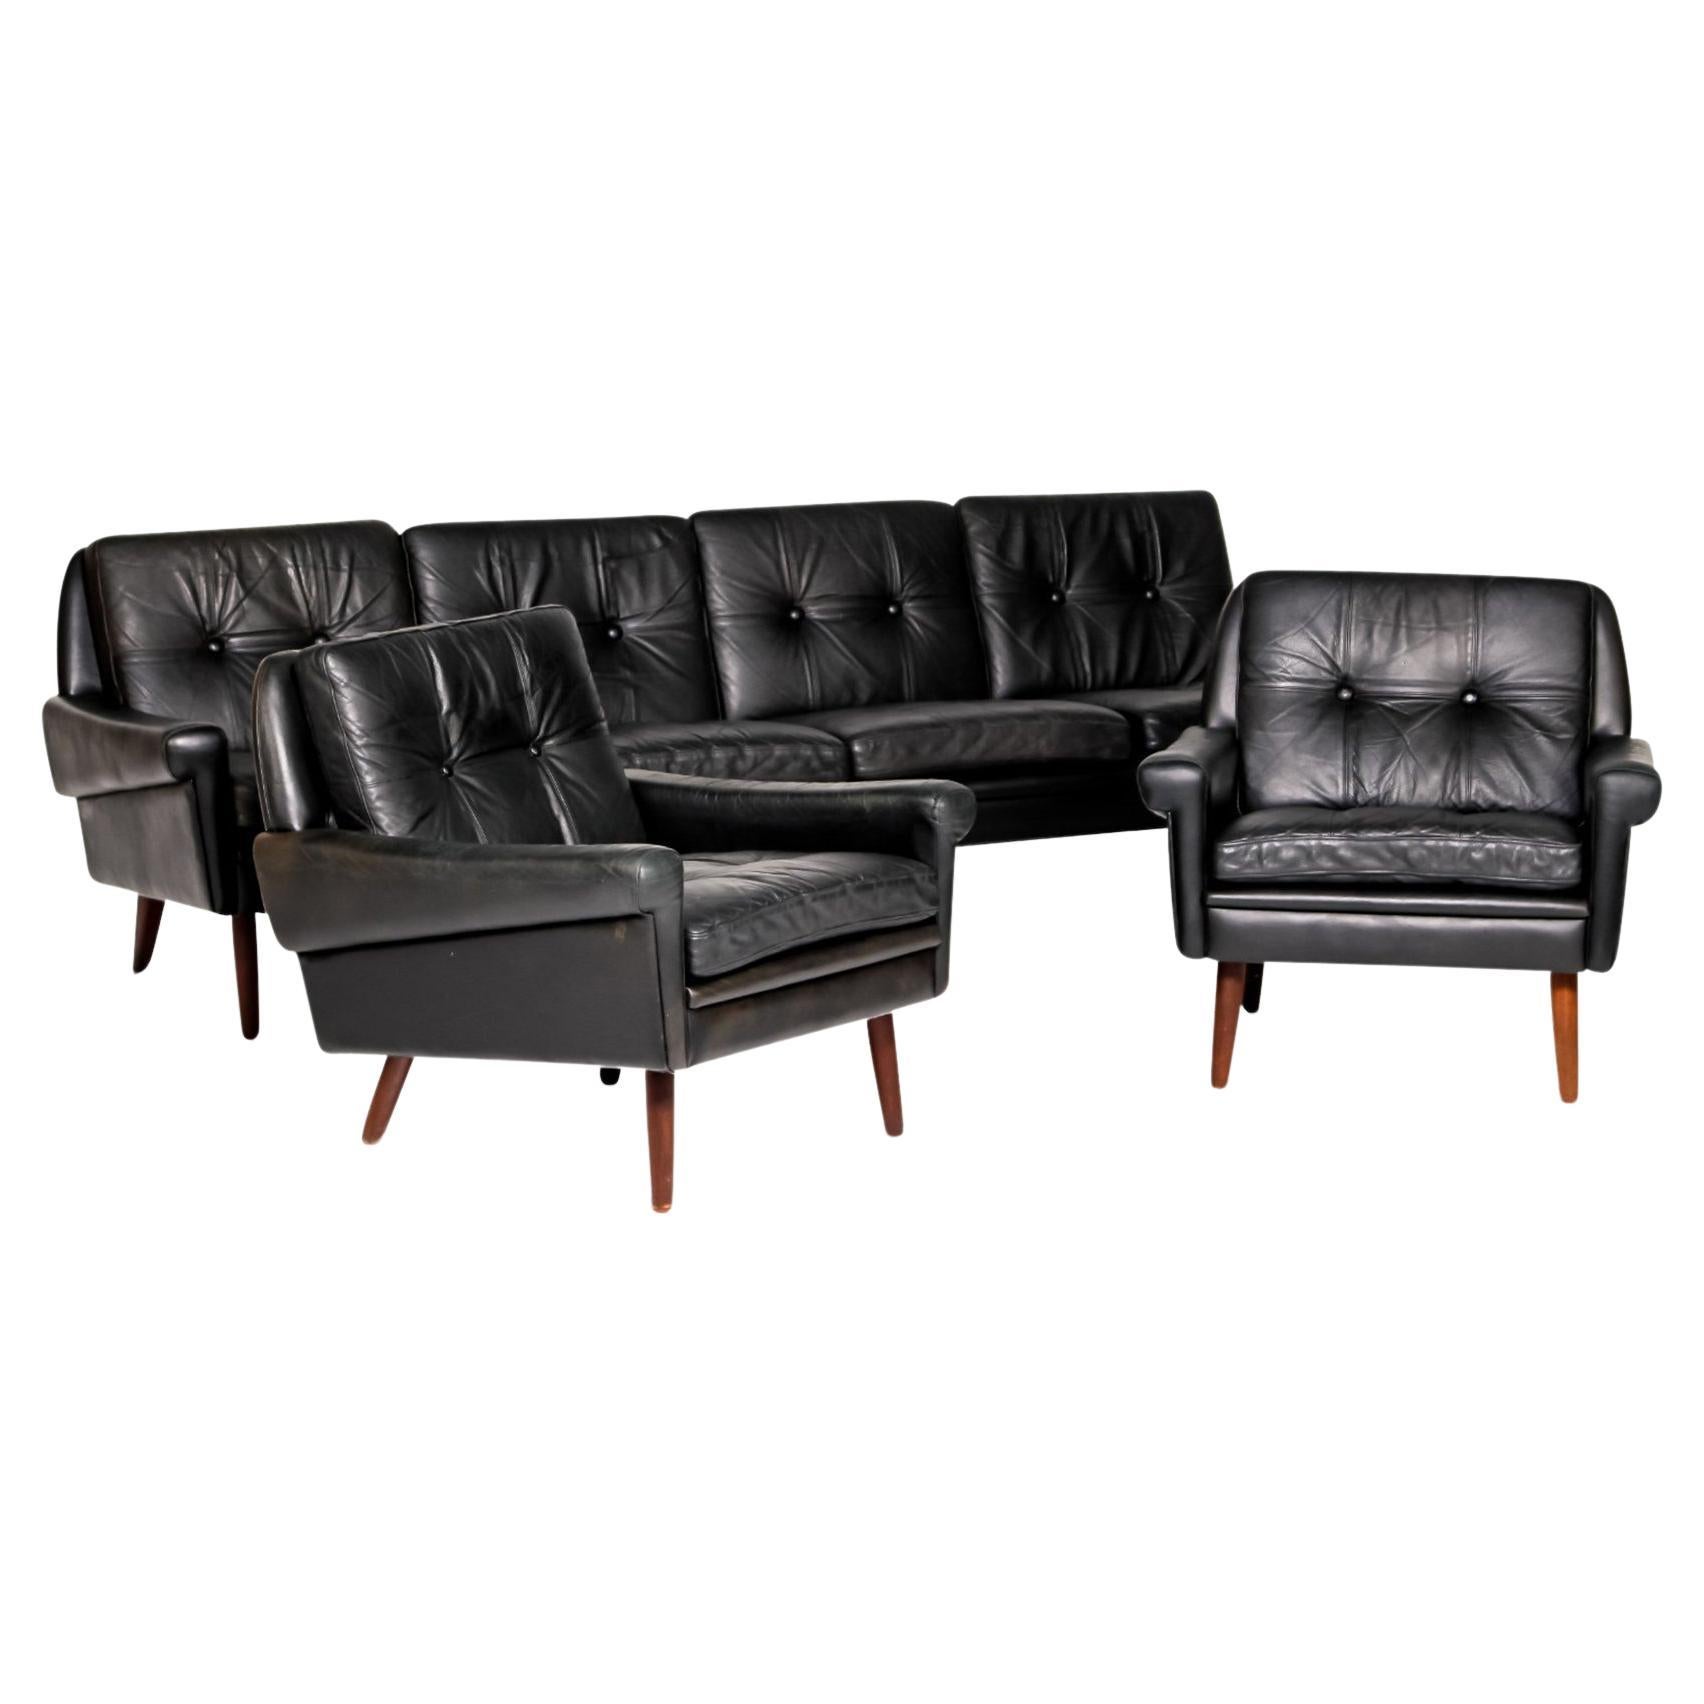 Svend Skipper Four Seat Sofa in Black Leather + Pair of Matching Armchairs For Sale